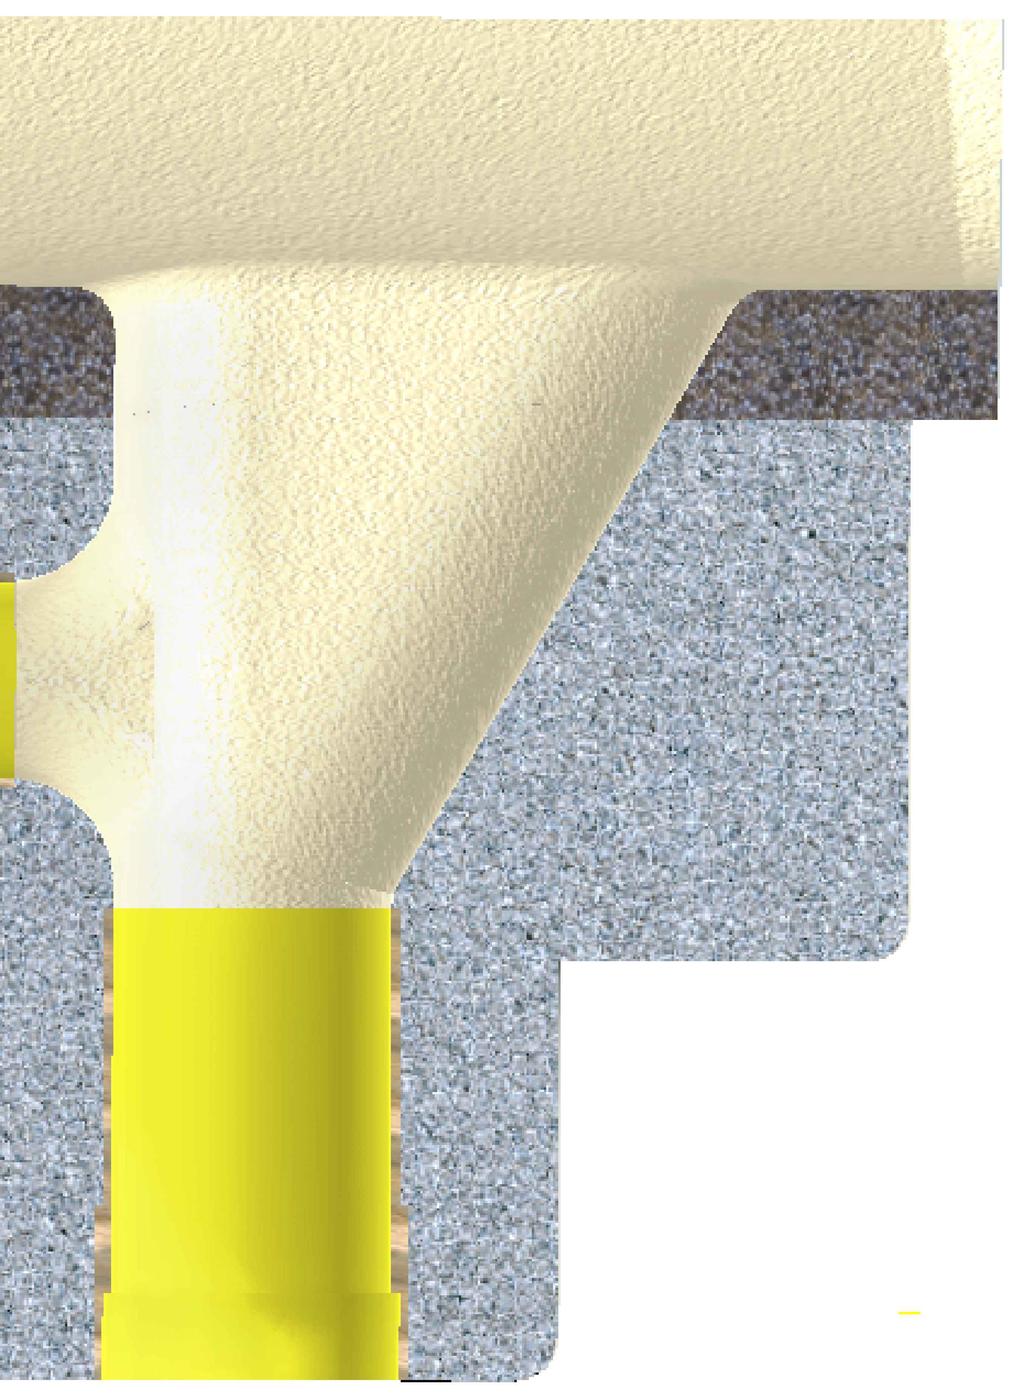 ender cut out surface to the required finished dimensions, ensuring that the surface is smooth and free of surface defects.